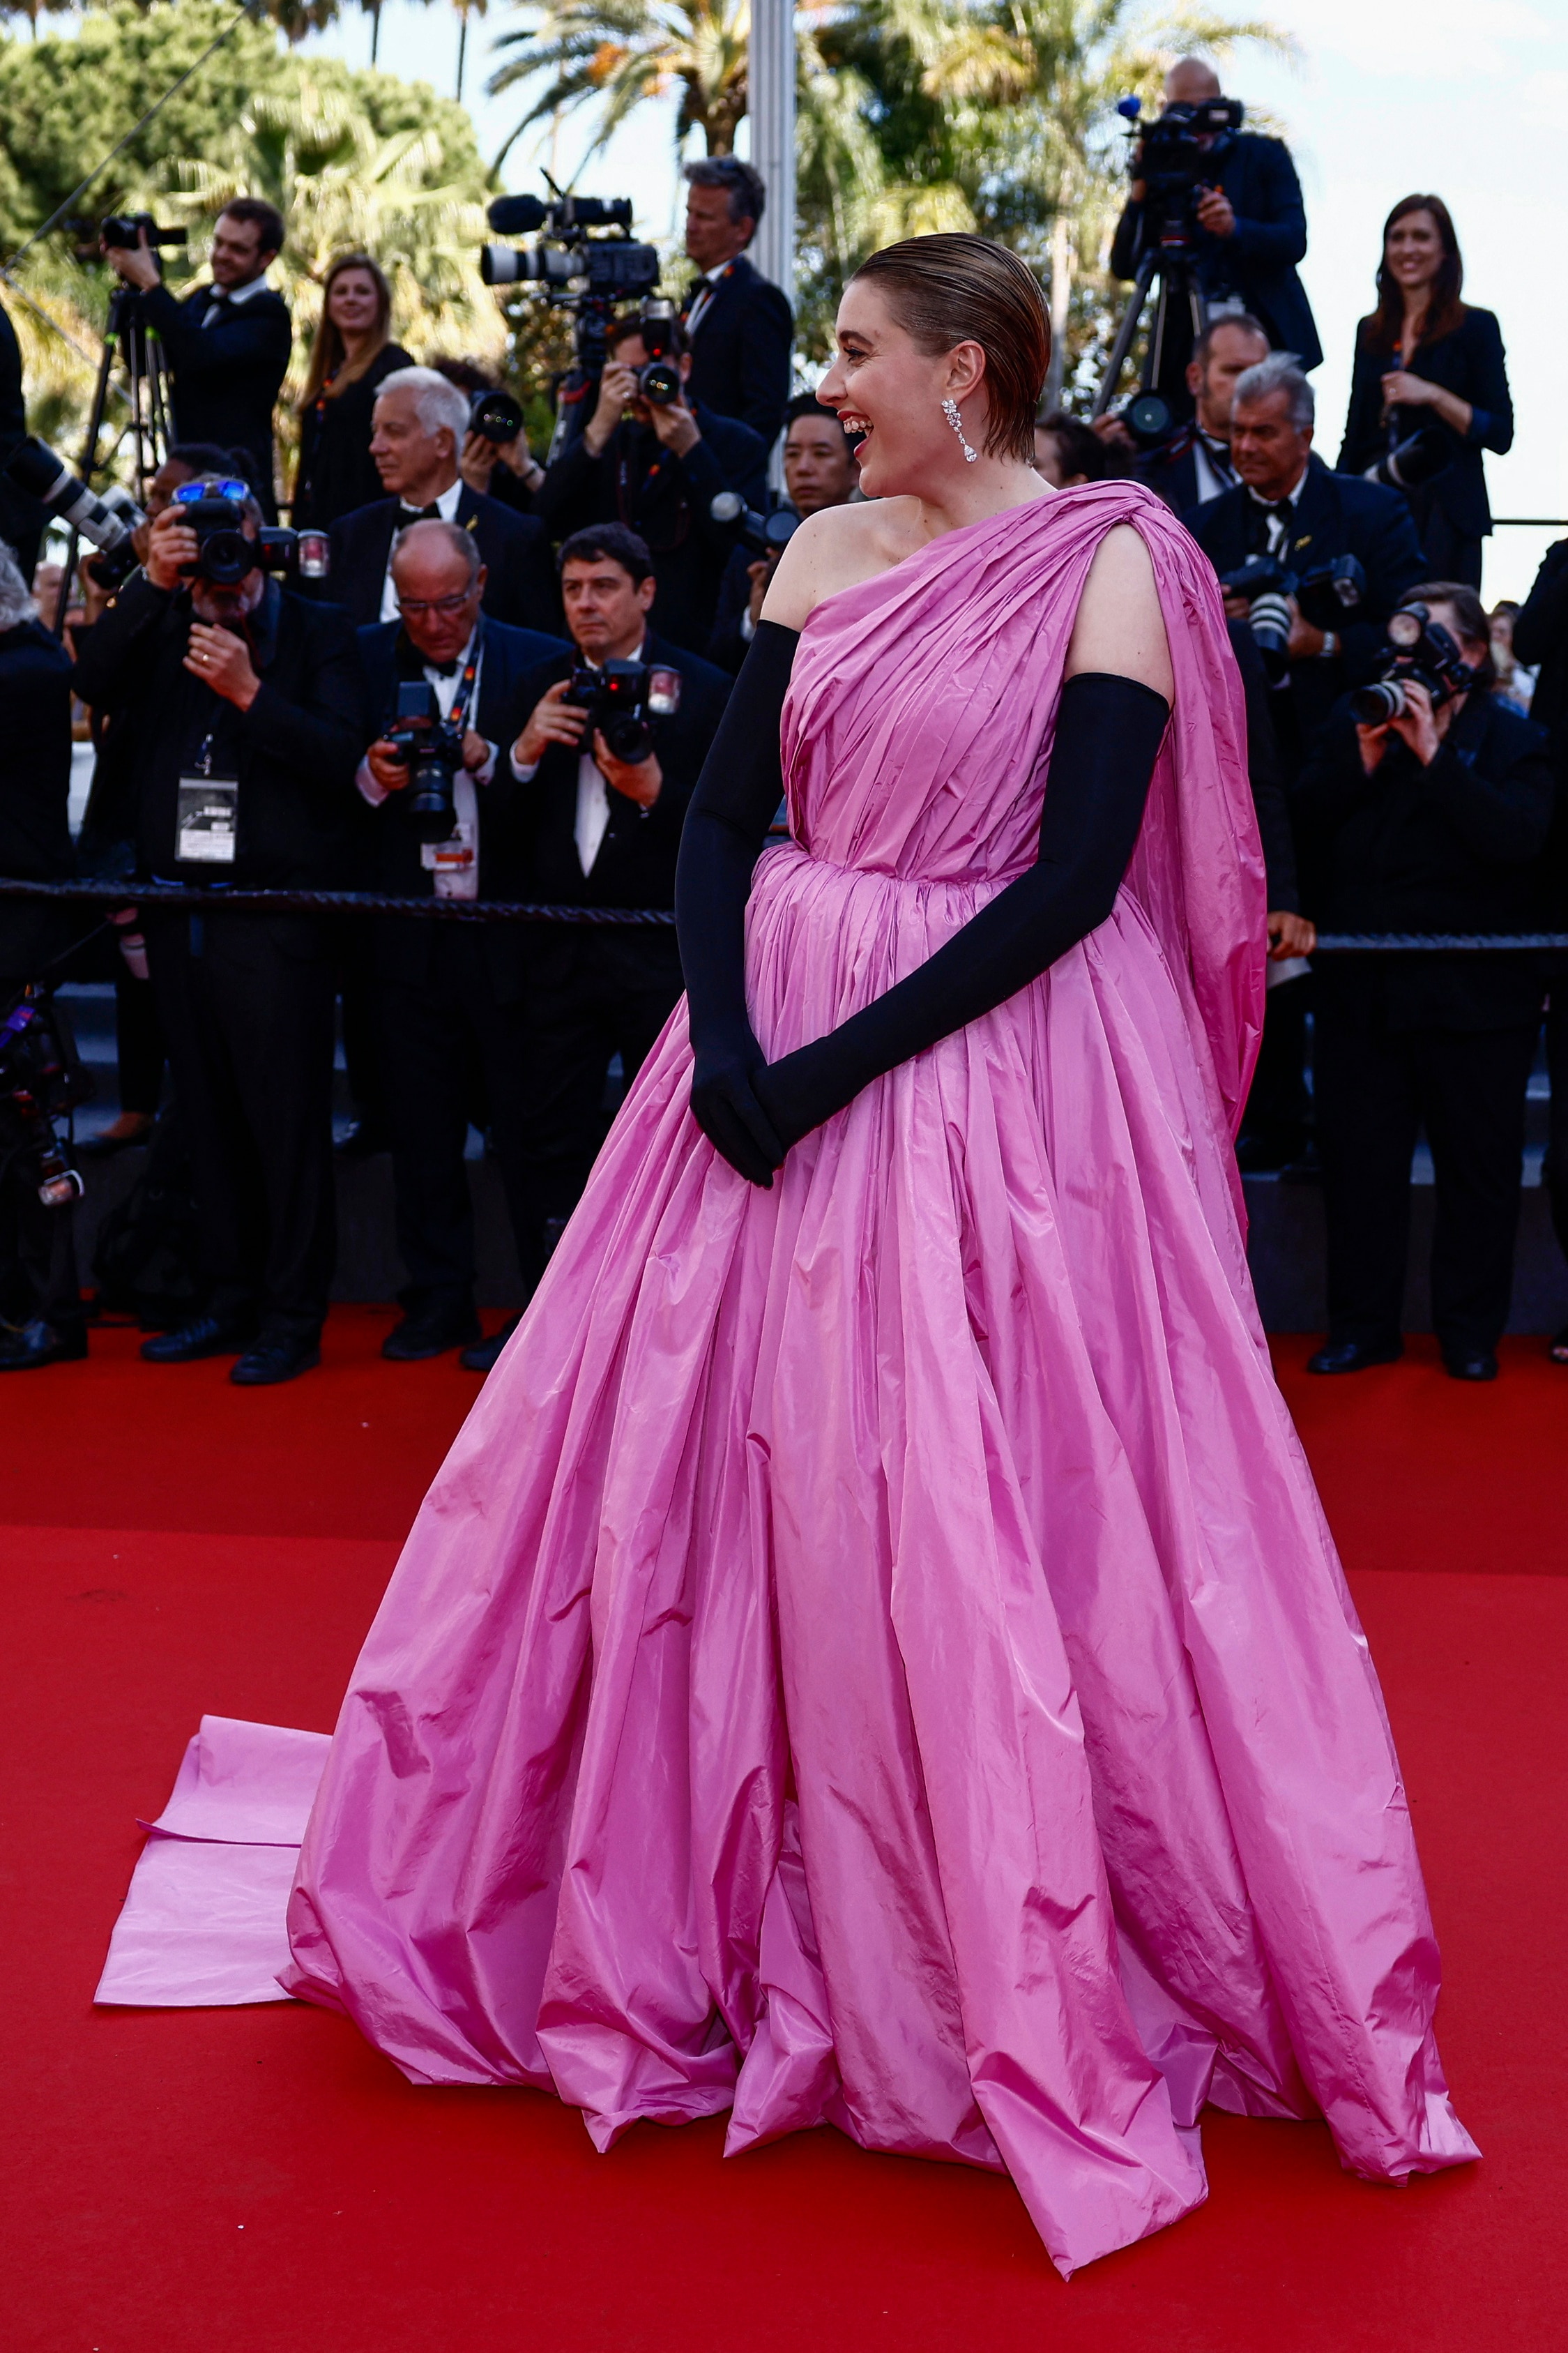 Greta Gerwig wearing a long puffy pink dress with a long sash over one shoulder